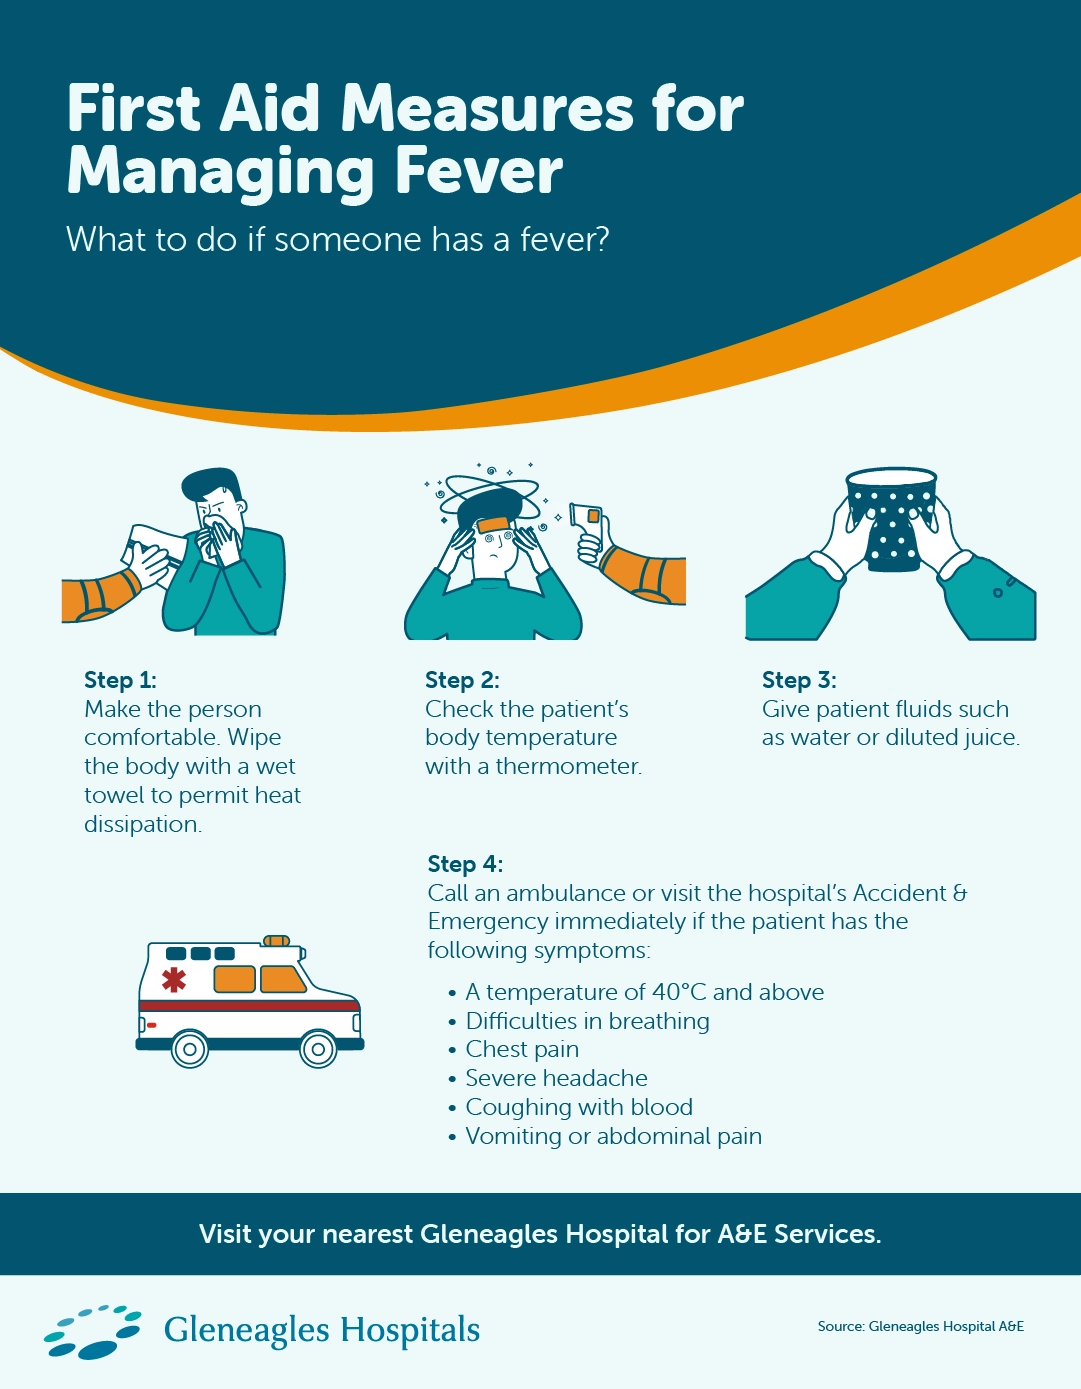 Step-by-step first aid measures for managing fever